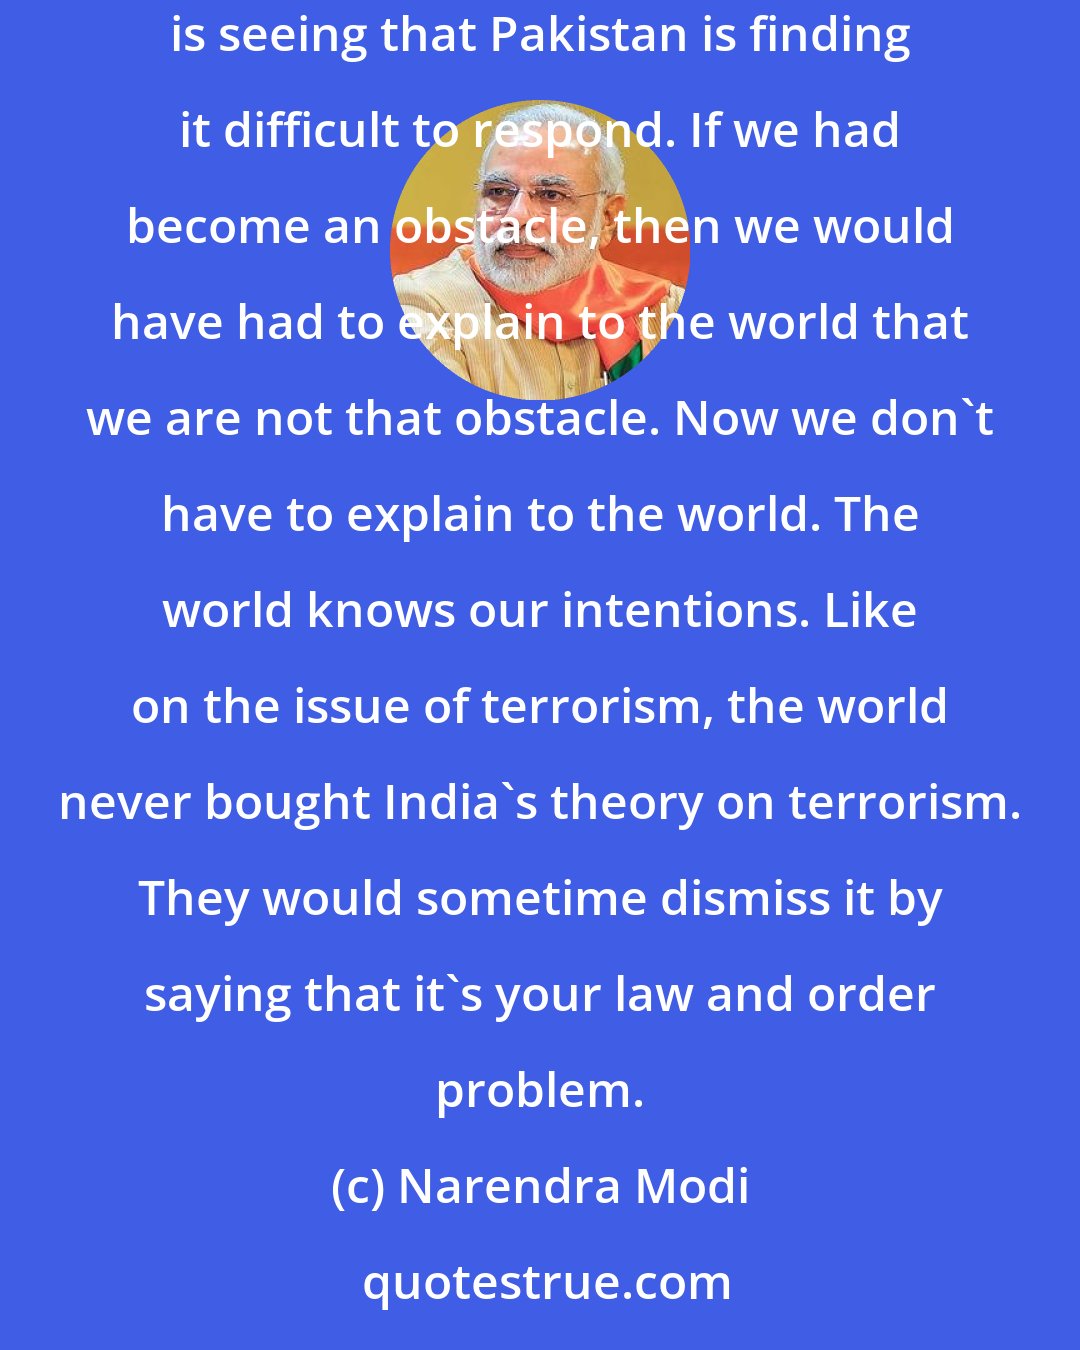 Narendra Modi: Now I don't have to explain to the world about India's position. The world is unanimously appreciating India's position. And the world is seeing that Pakistan is finding it difficult to respond. If we had become an obstacle, then we would have had to explain to the world that we are not that obstacle. Now we don't have to explain to the world. The world knows our intentions. Like on the issue of terrorism, the world never bought India's theory on terrorism. They would sometime dismiss it by saying that it's your law and order problem.